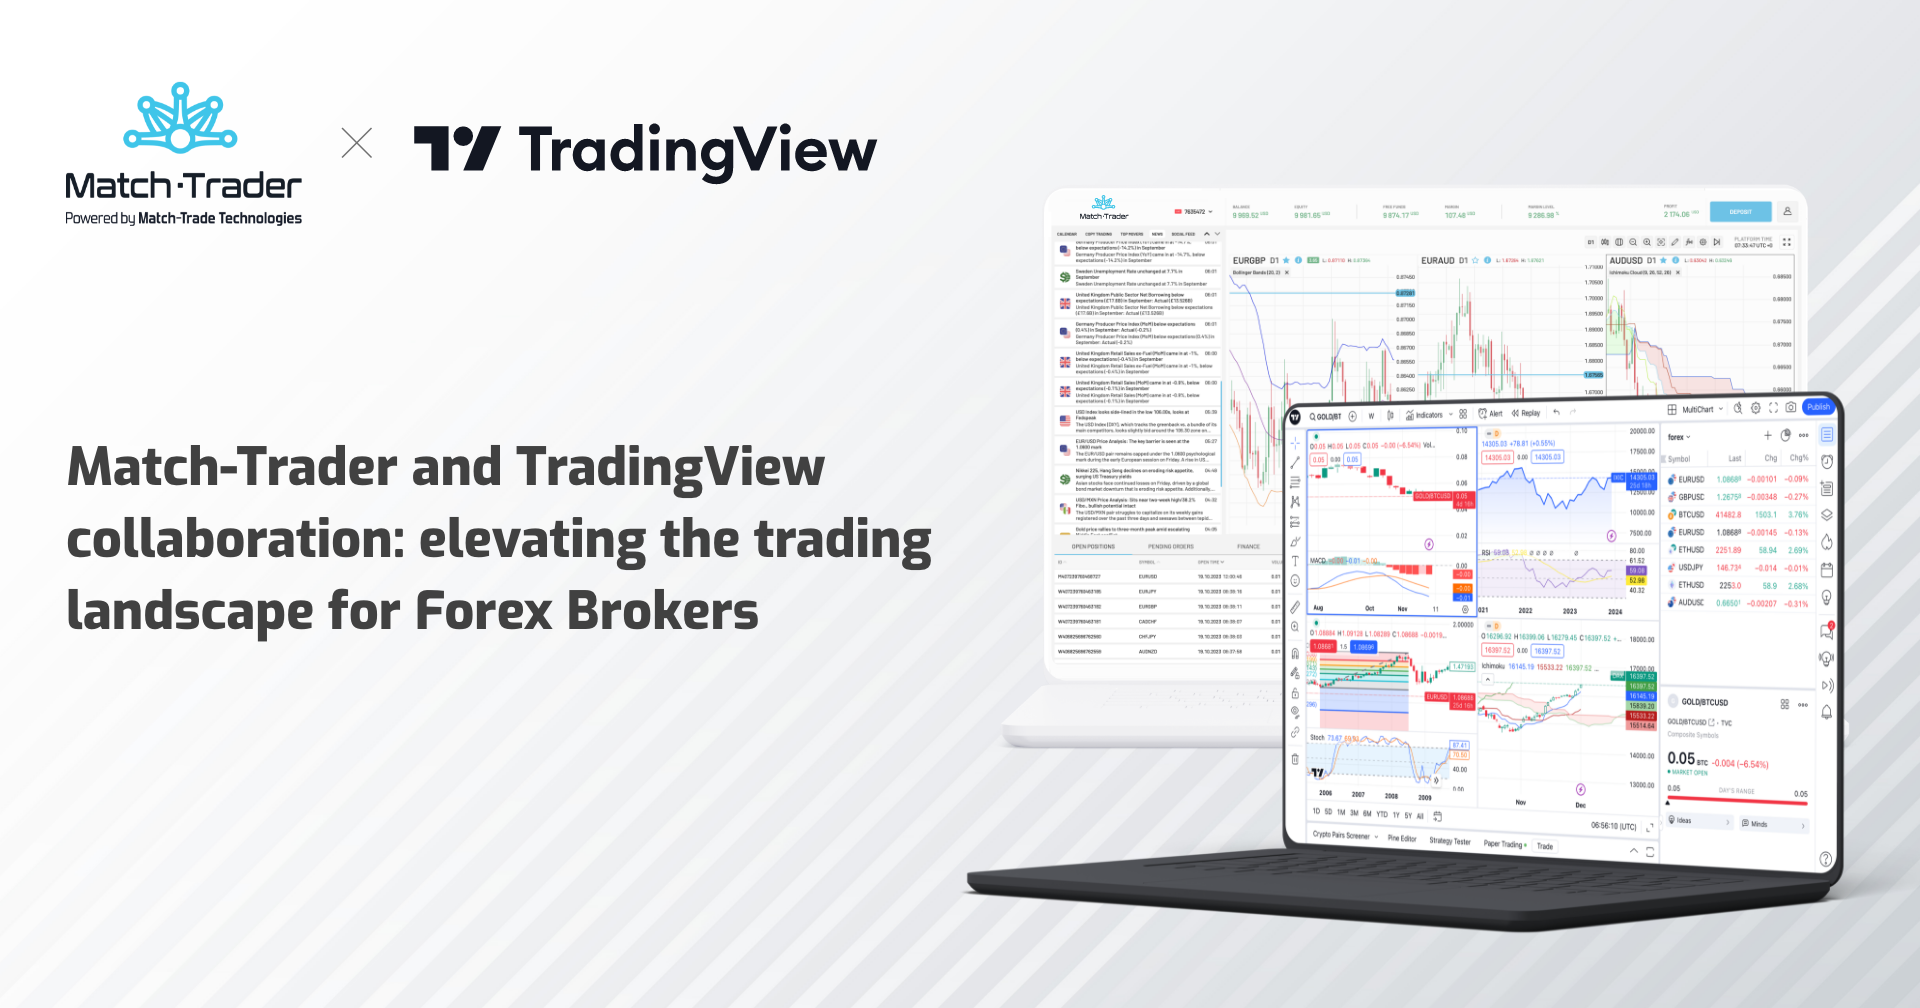 Match-Trader and TradingView collaboration: elevating the trading landscape for Forex Brokers